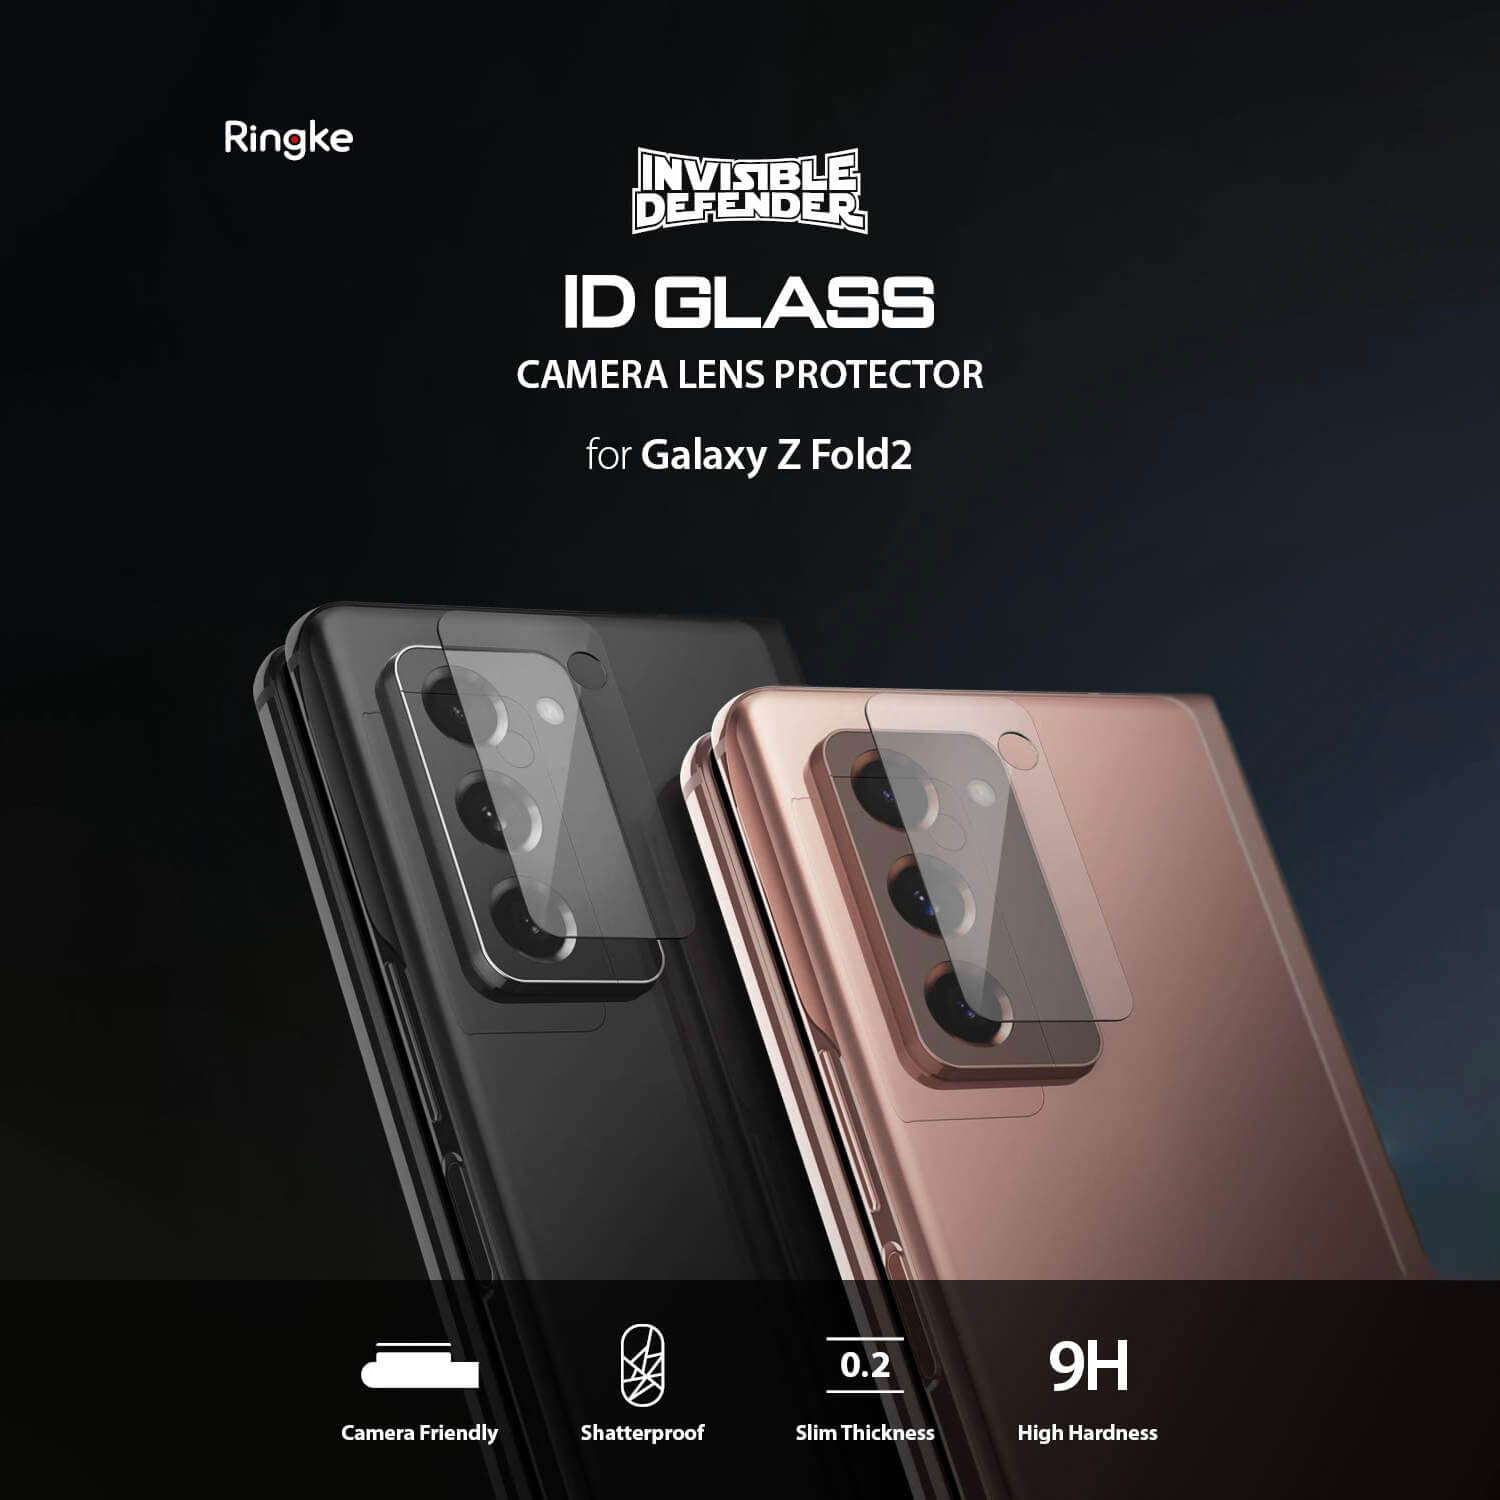 Ringke Samsung Galaxy Z Fold 2 Camera Protector Invisible Defender Glass 3 Pack